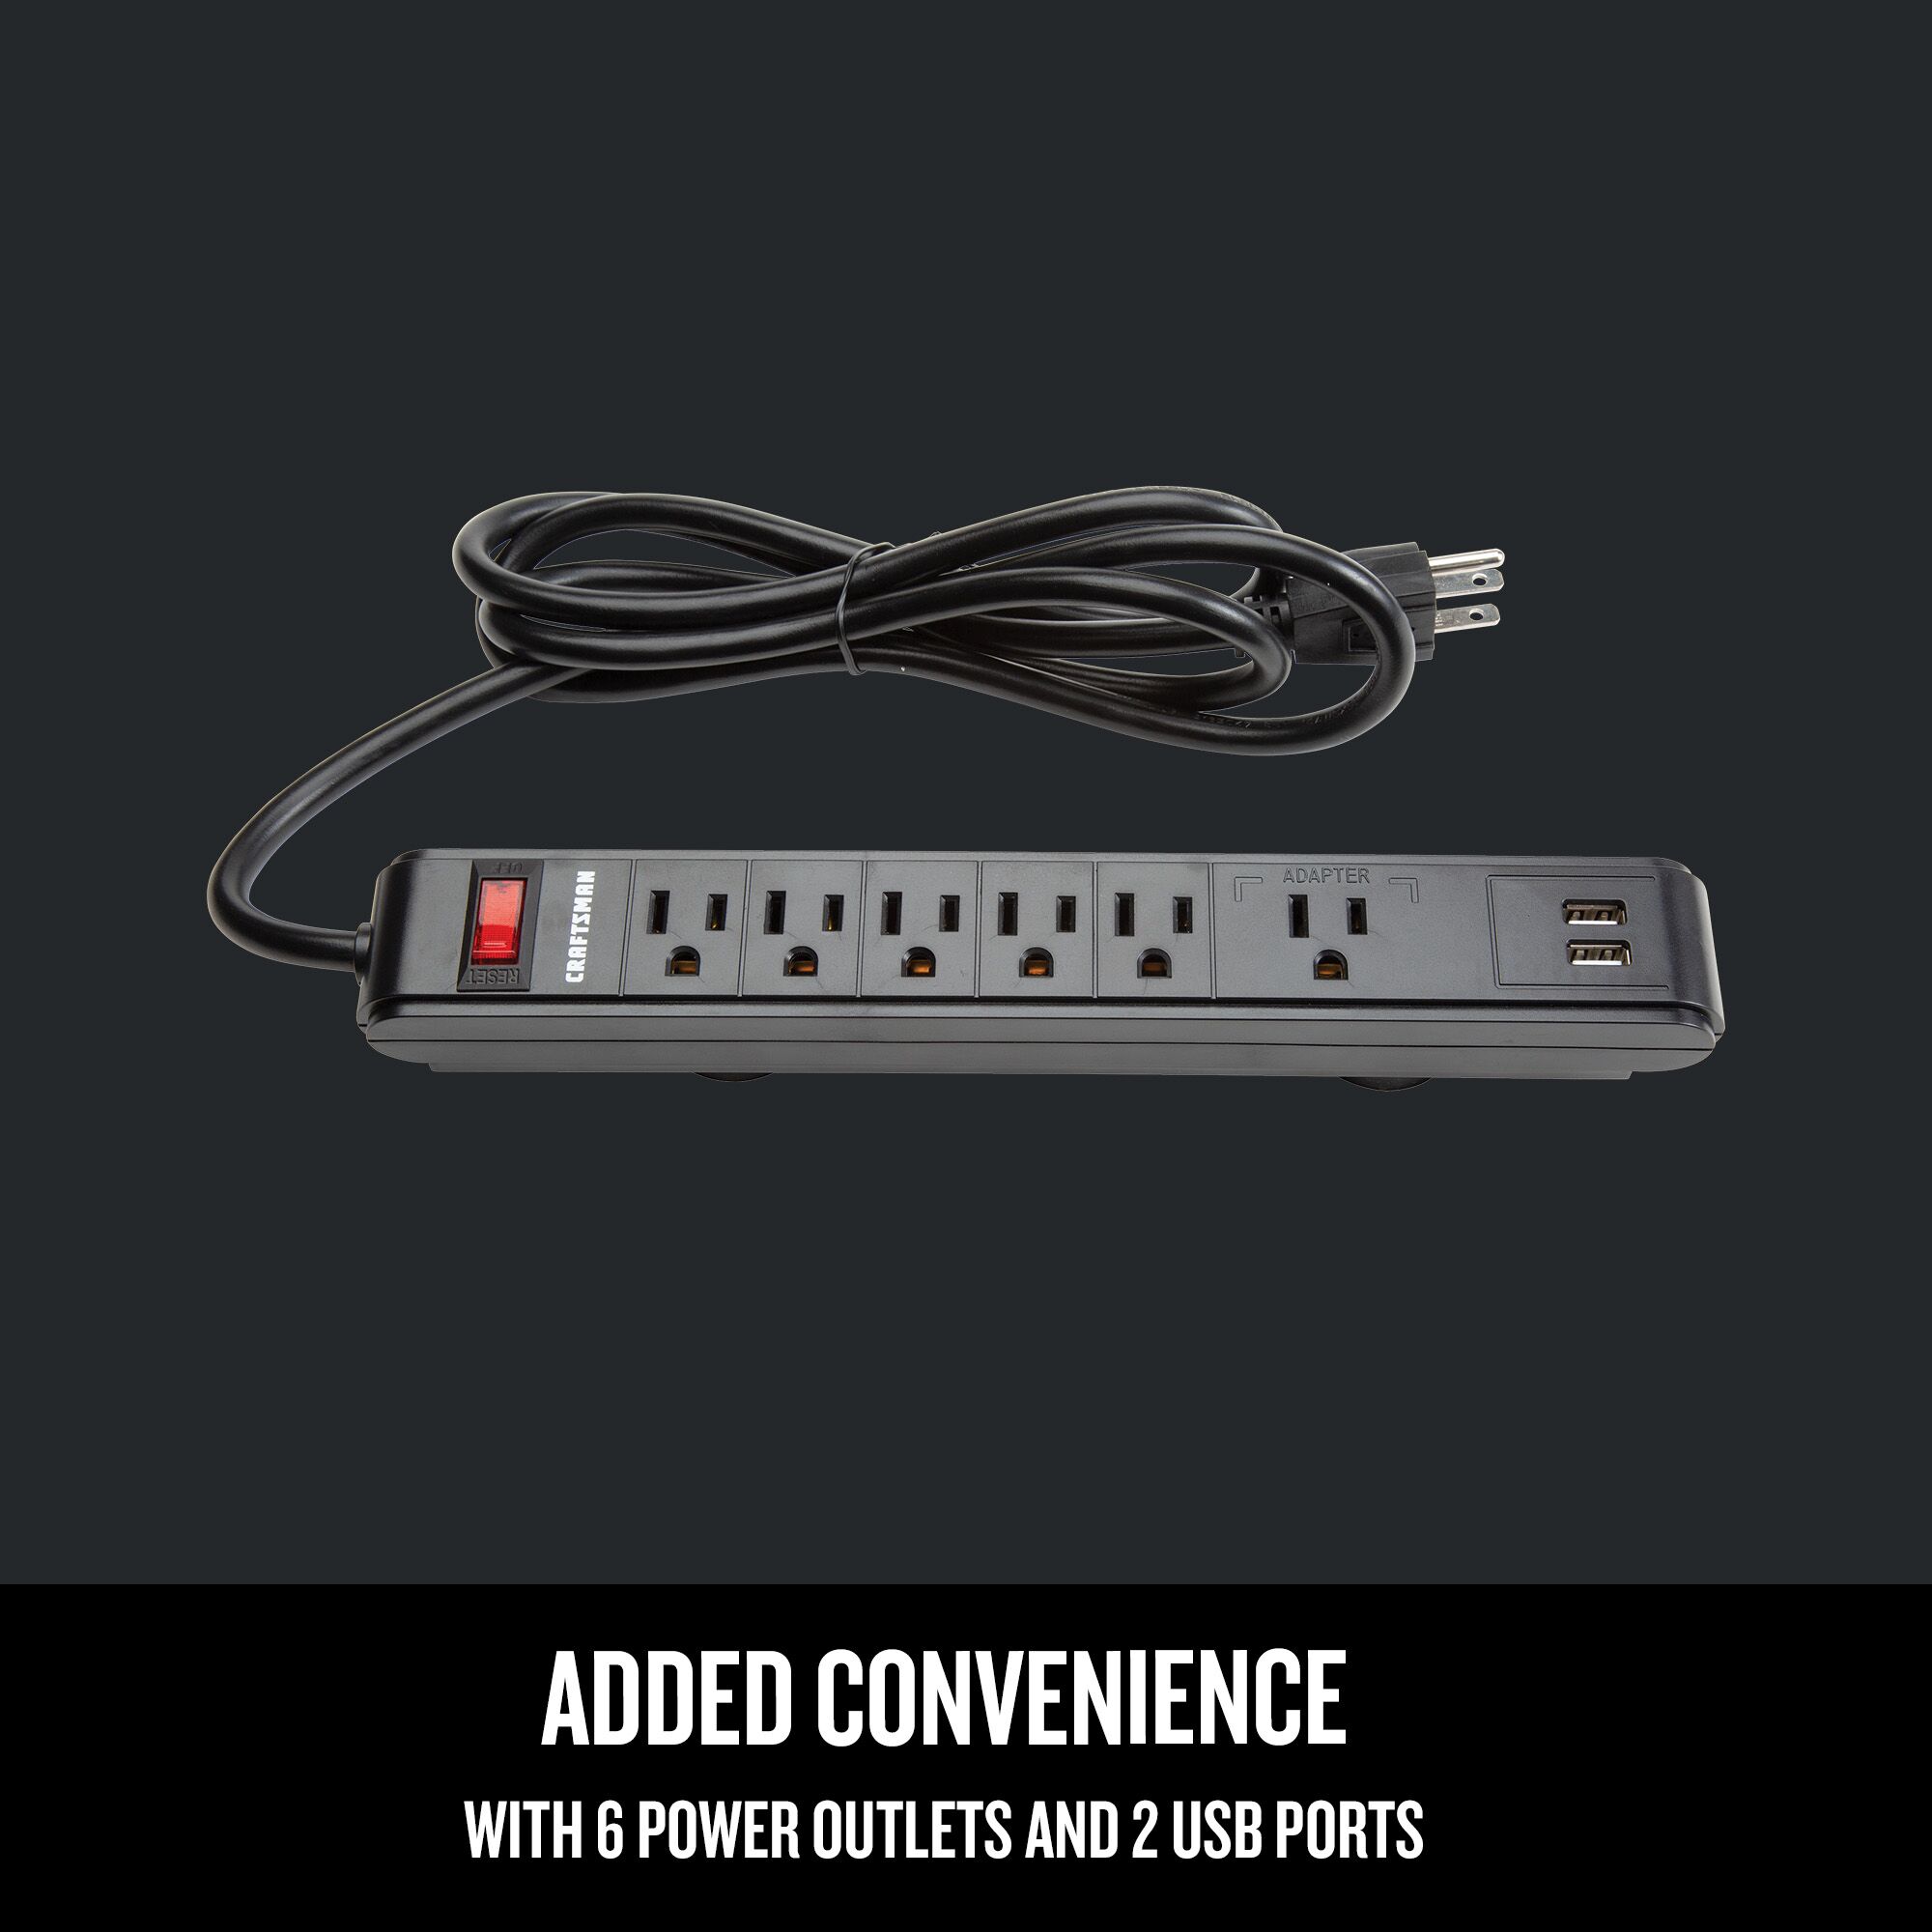 Added convenience with six power outlets and two USB ports